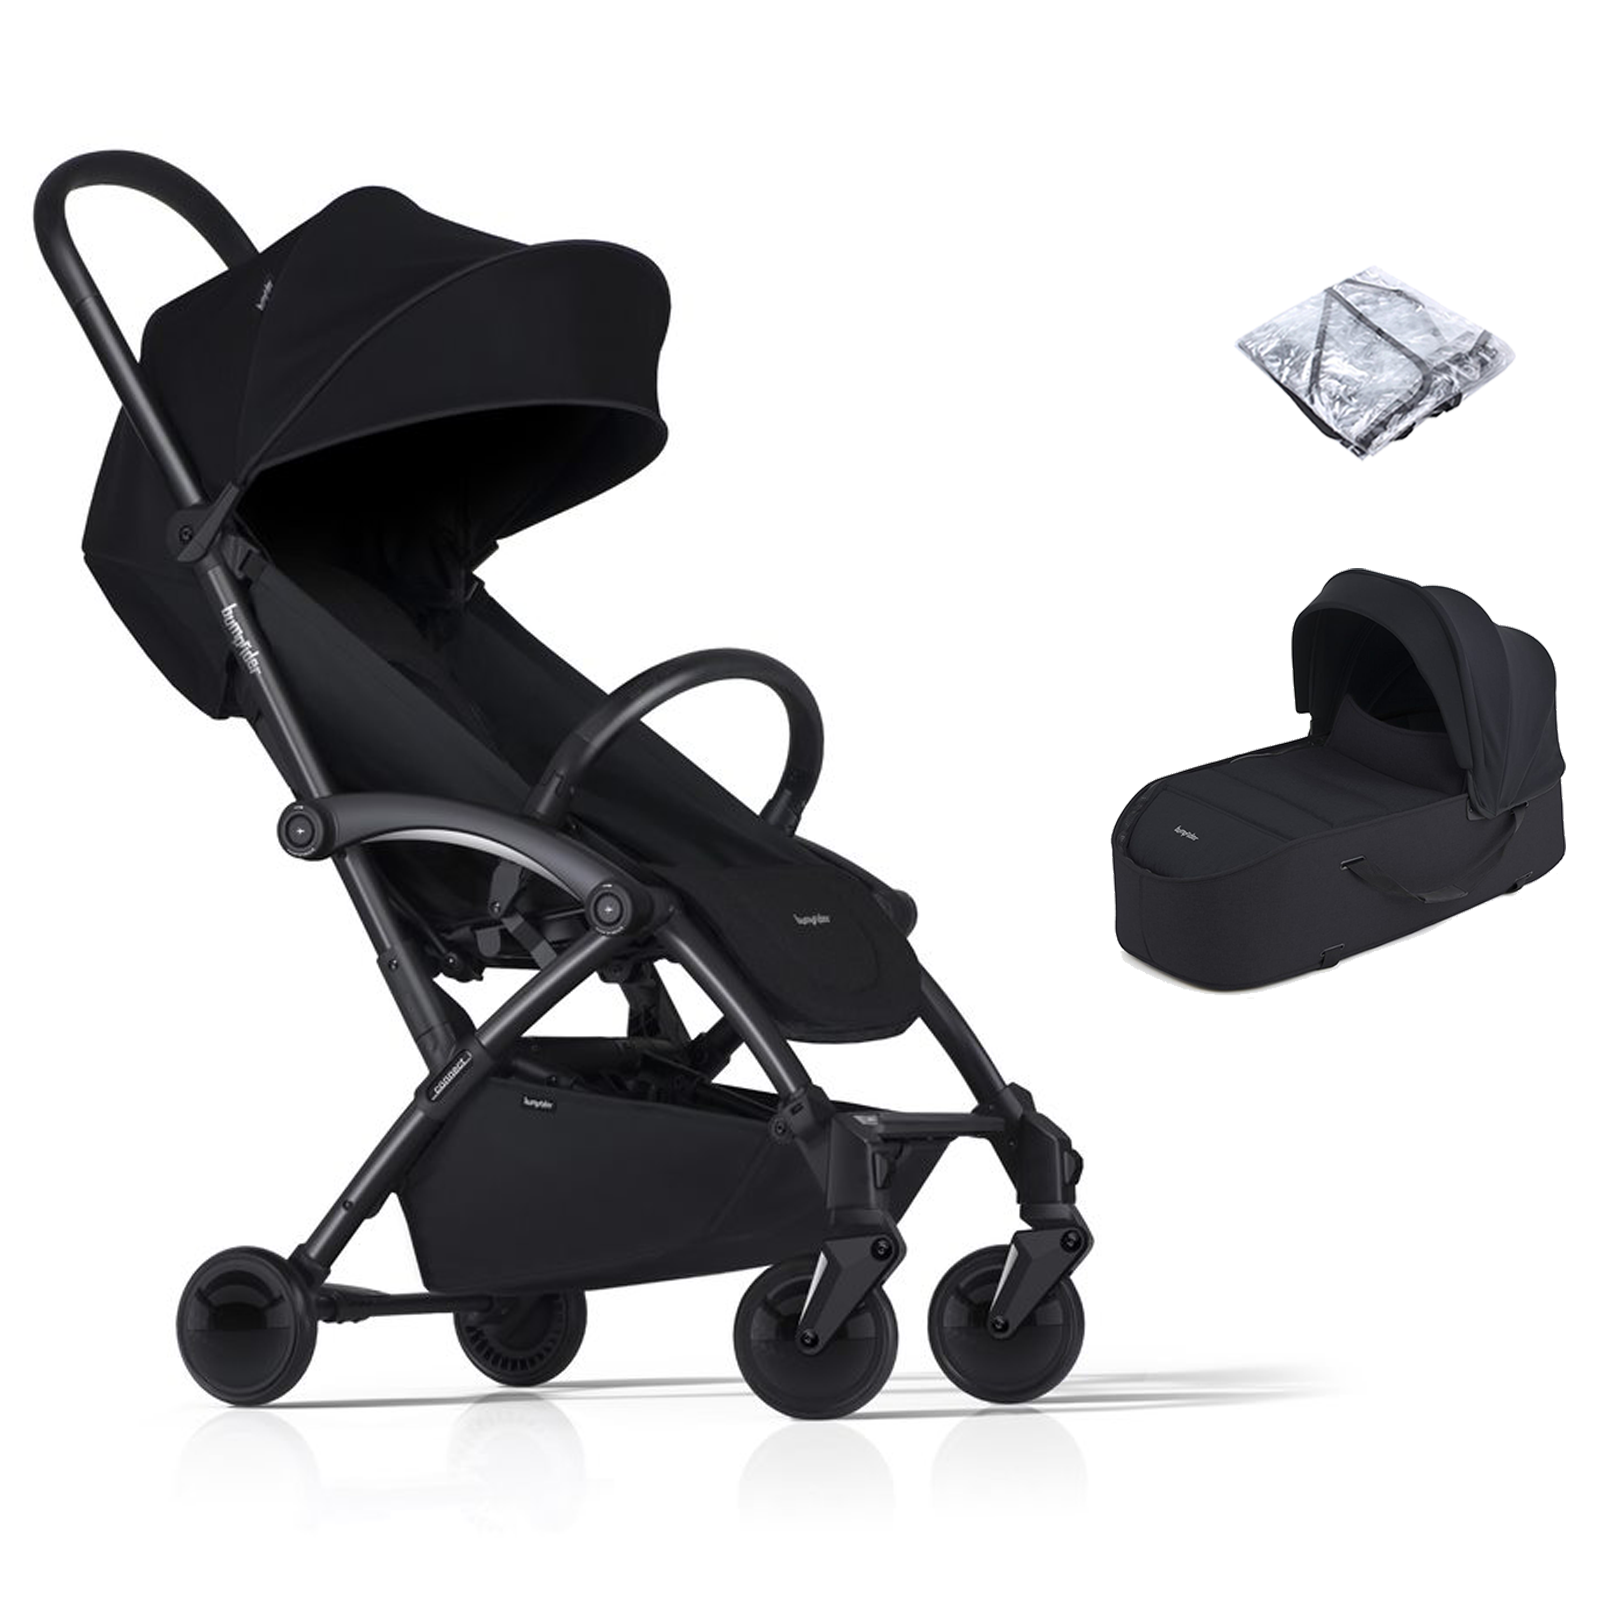 Bumprider Connect2 Stroller with Carrycot - Black